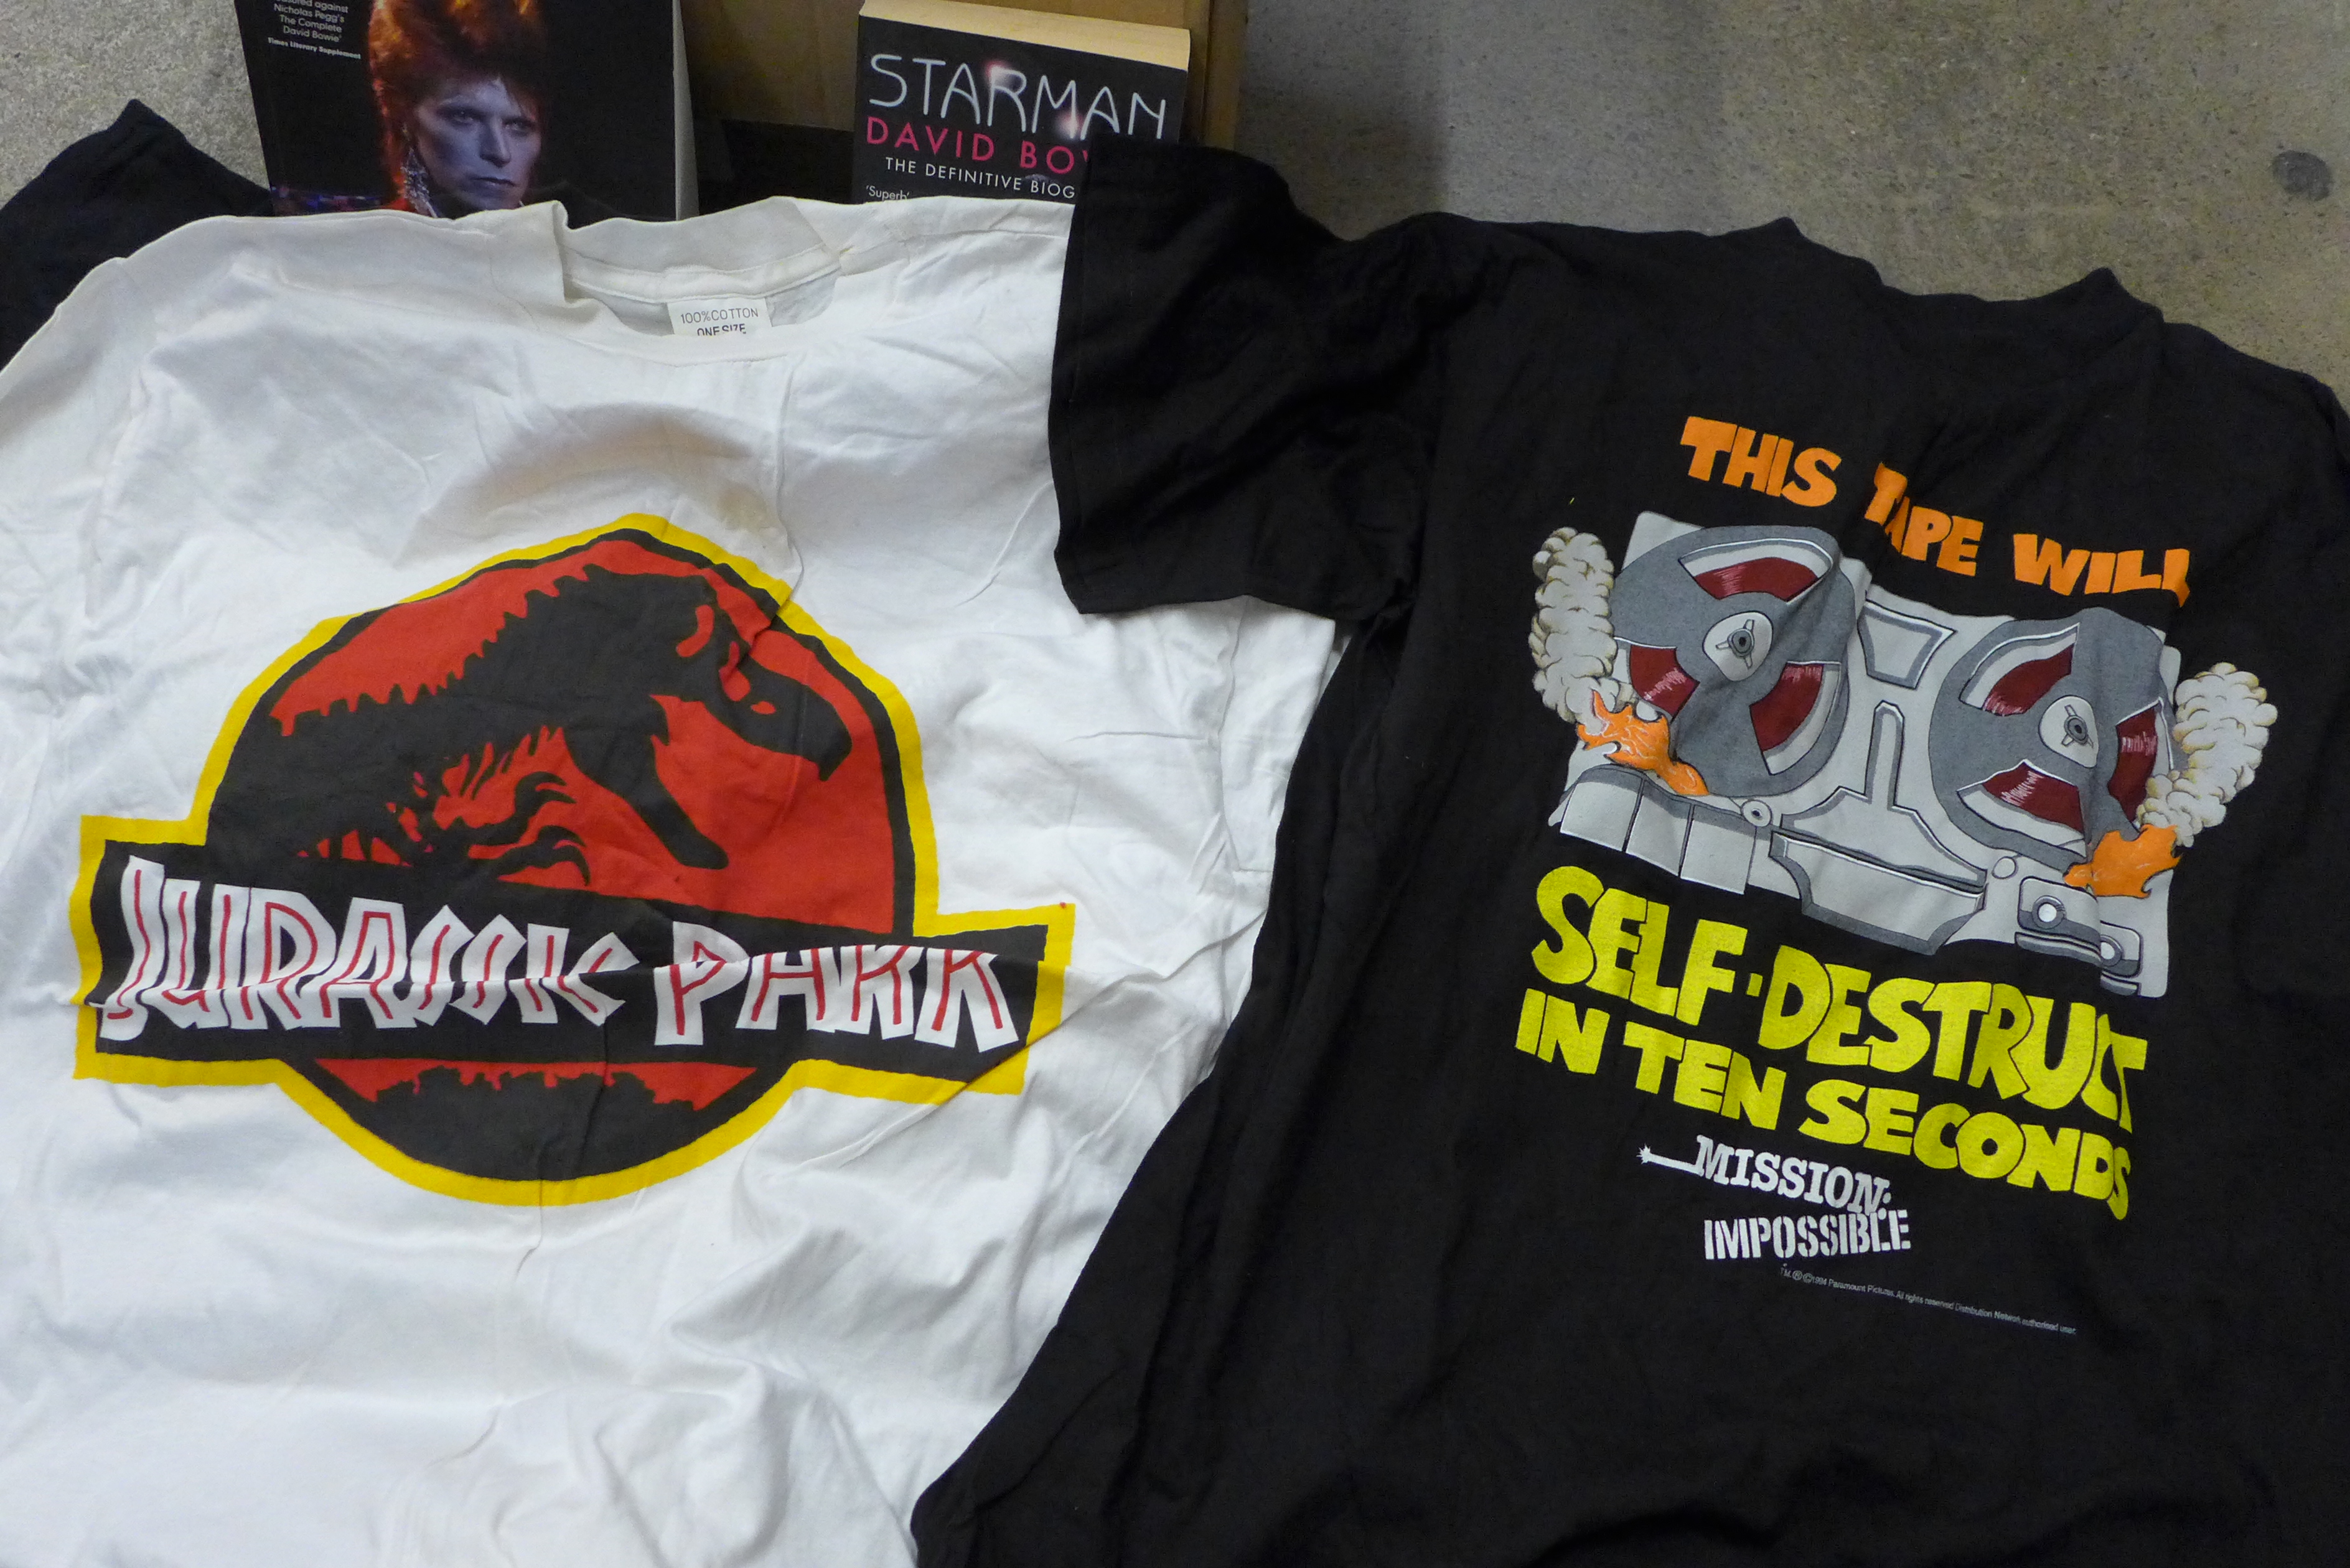 Music related T-shirts, rock music books and two David Bowie books - Image 3 of 5